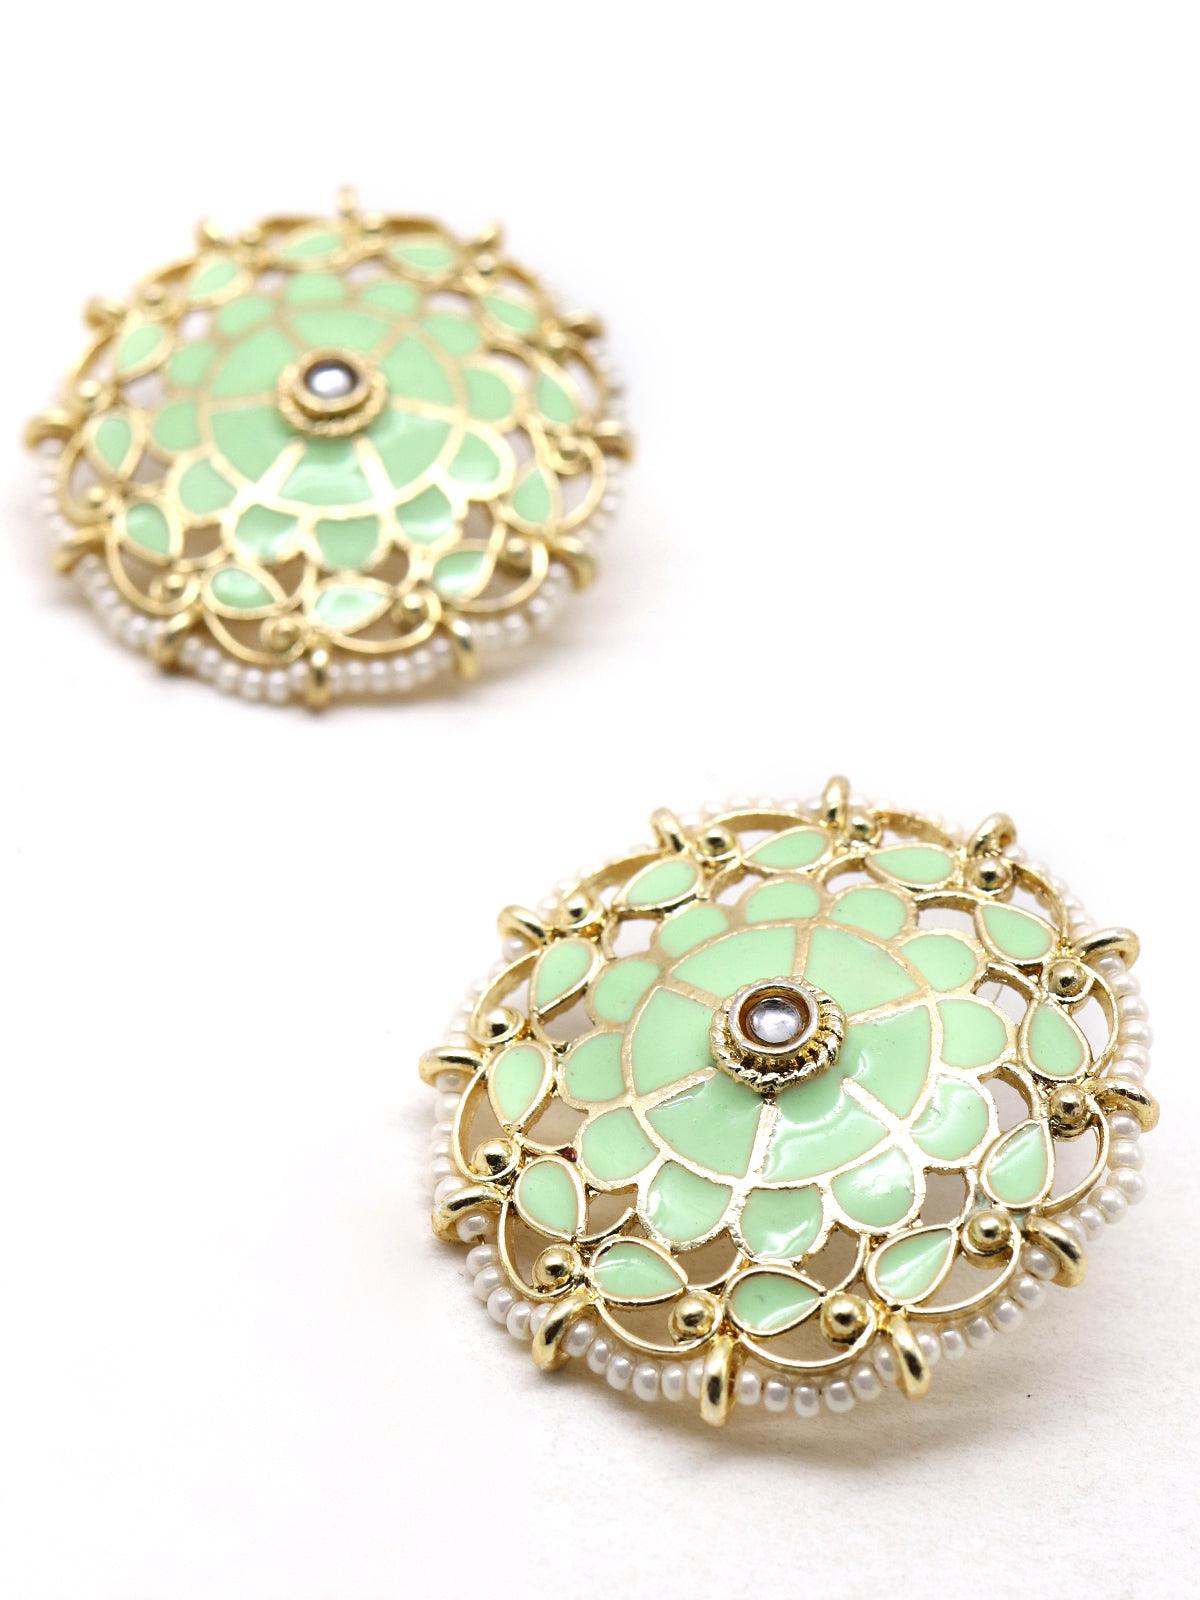 Women's Gold And Sober Green Tinted Stud Earrings! - Odette